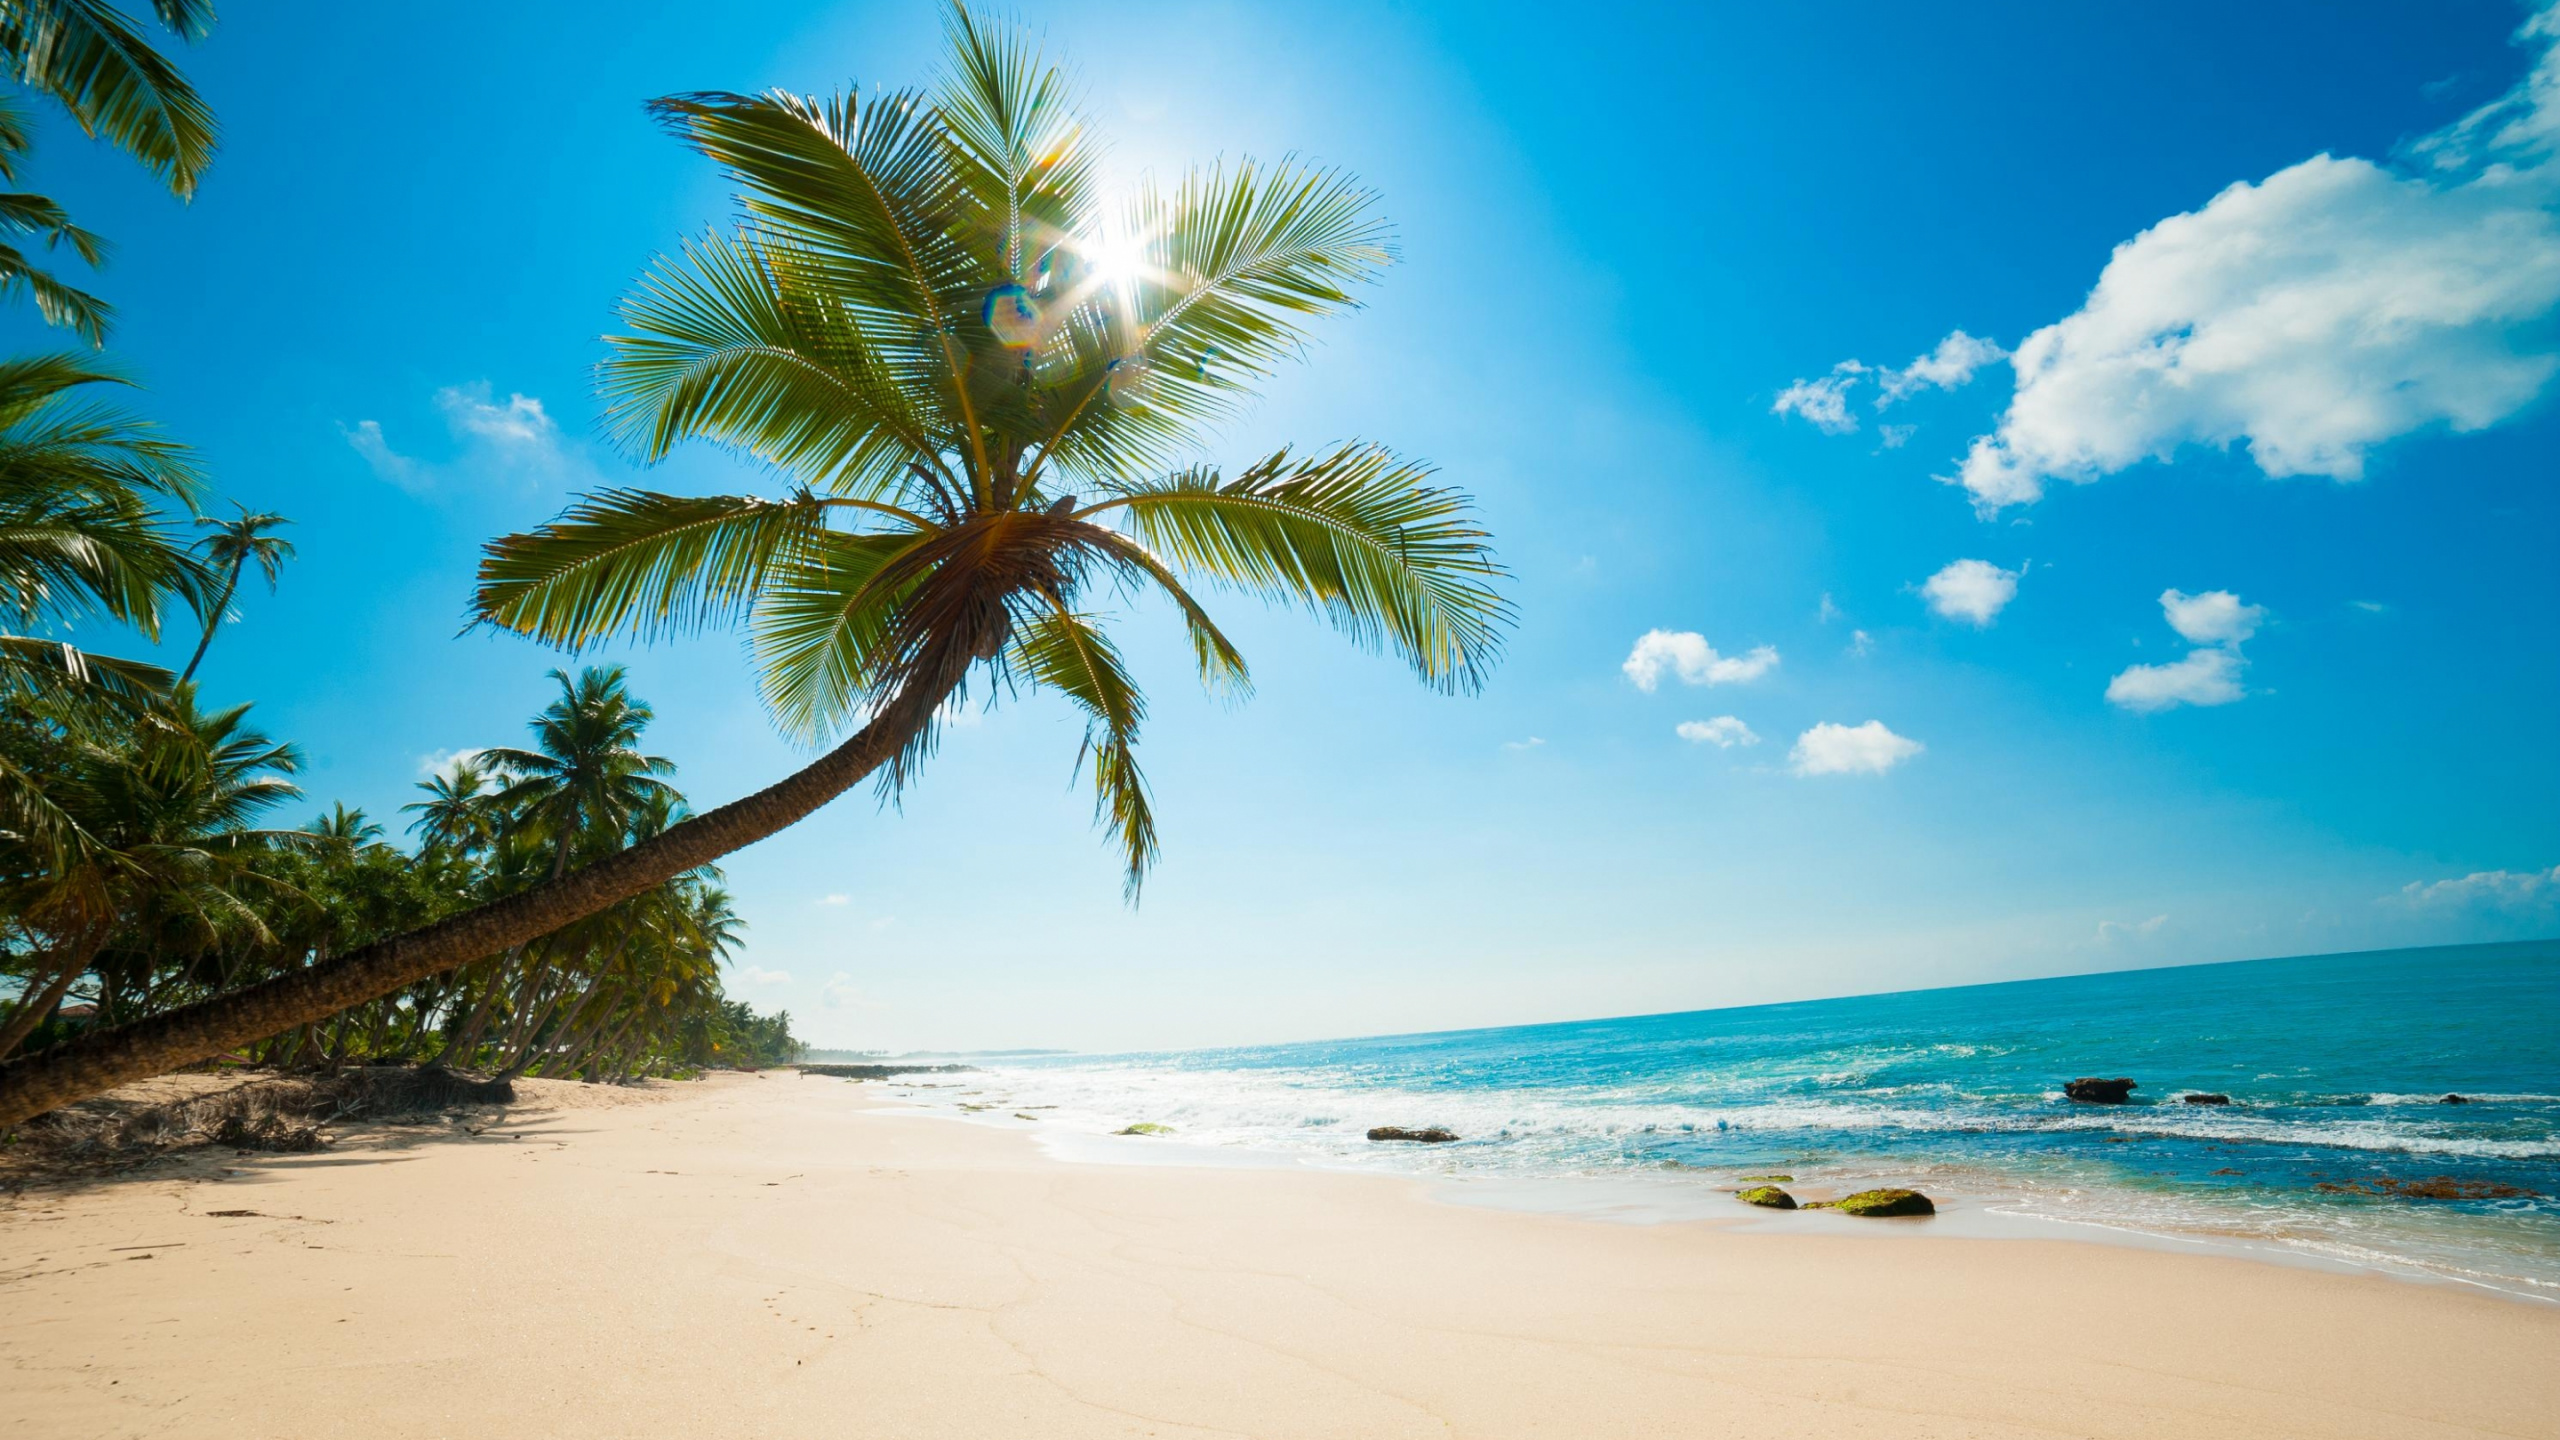 Green Palm Tree on White Sand Beach During Daytime. Wallpaper in 2560x1440 Resolution